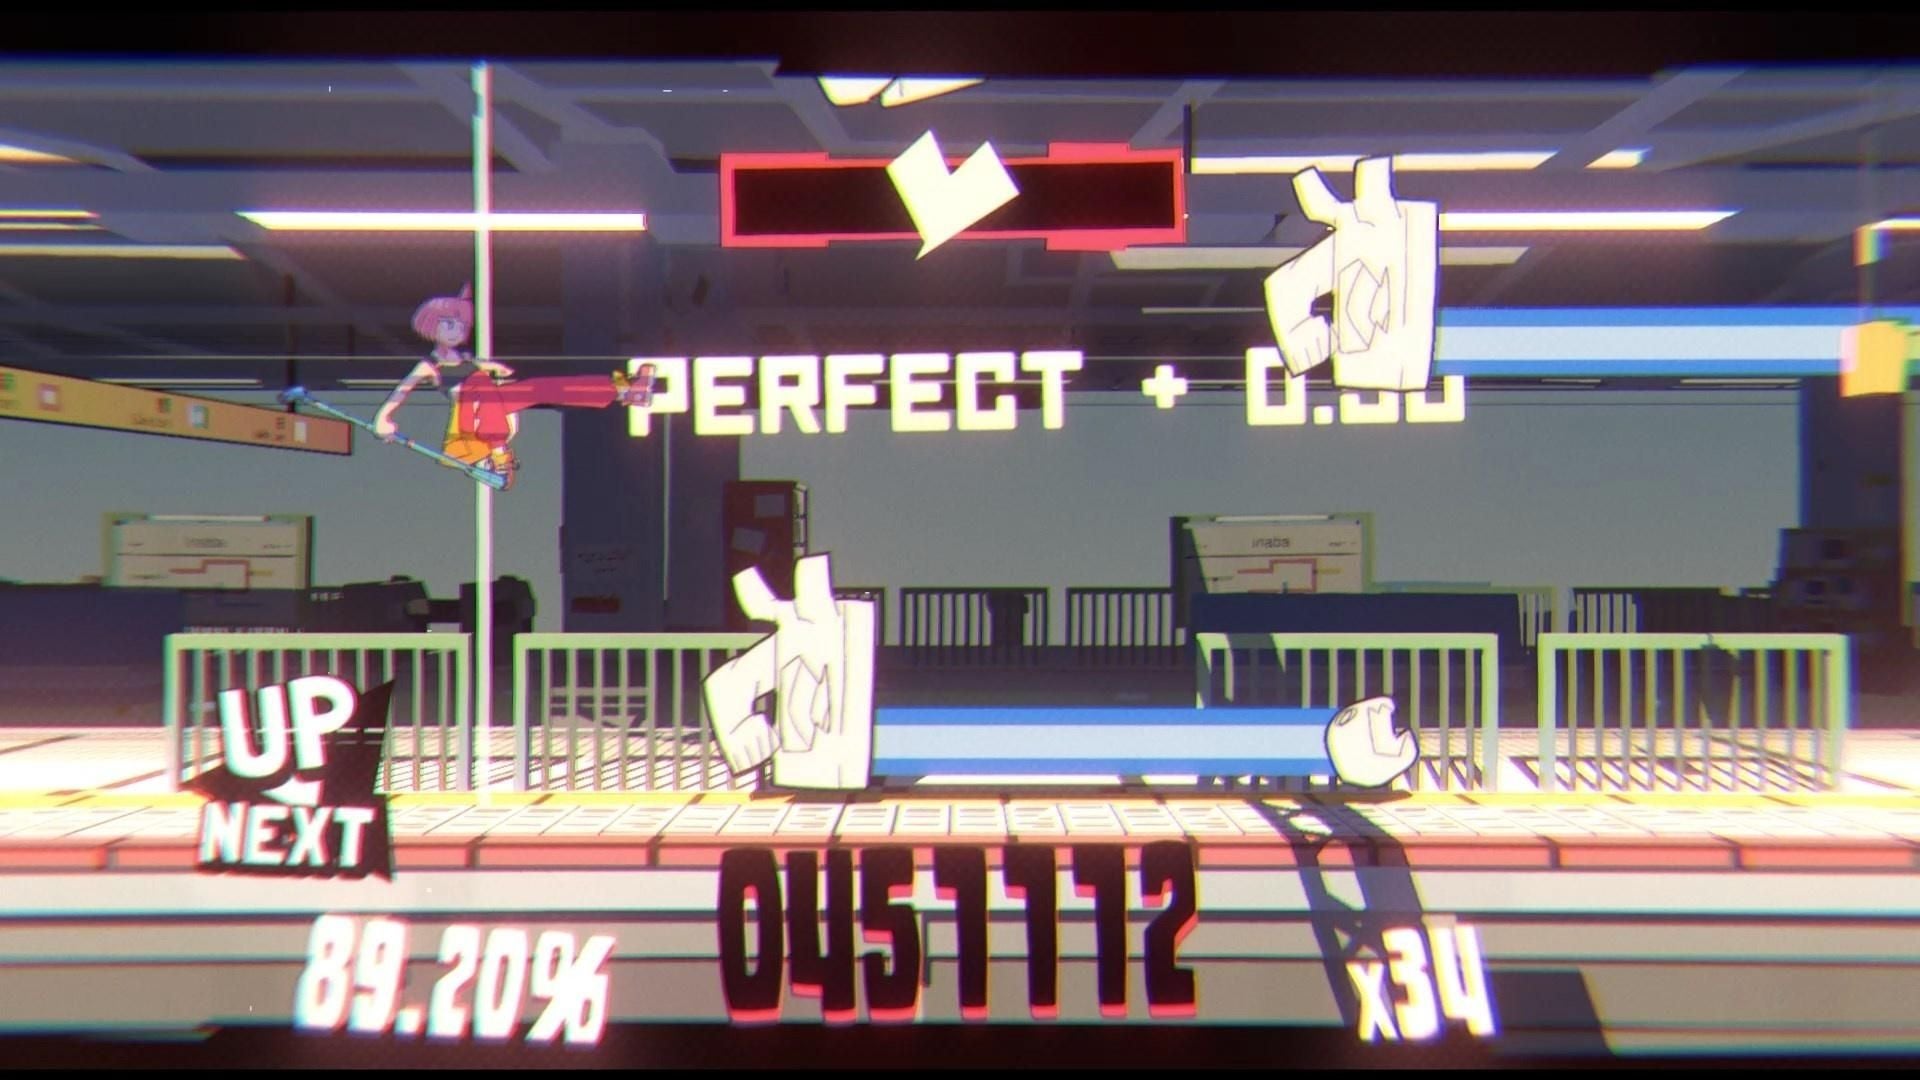 Unbeatable is a beat 'em up rhythm game I cannot wait to play the full release of. (Screenshot: D-Cell Games)